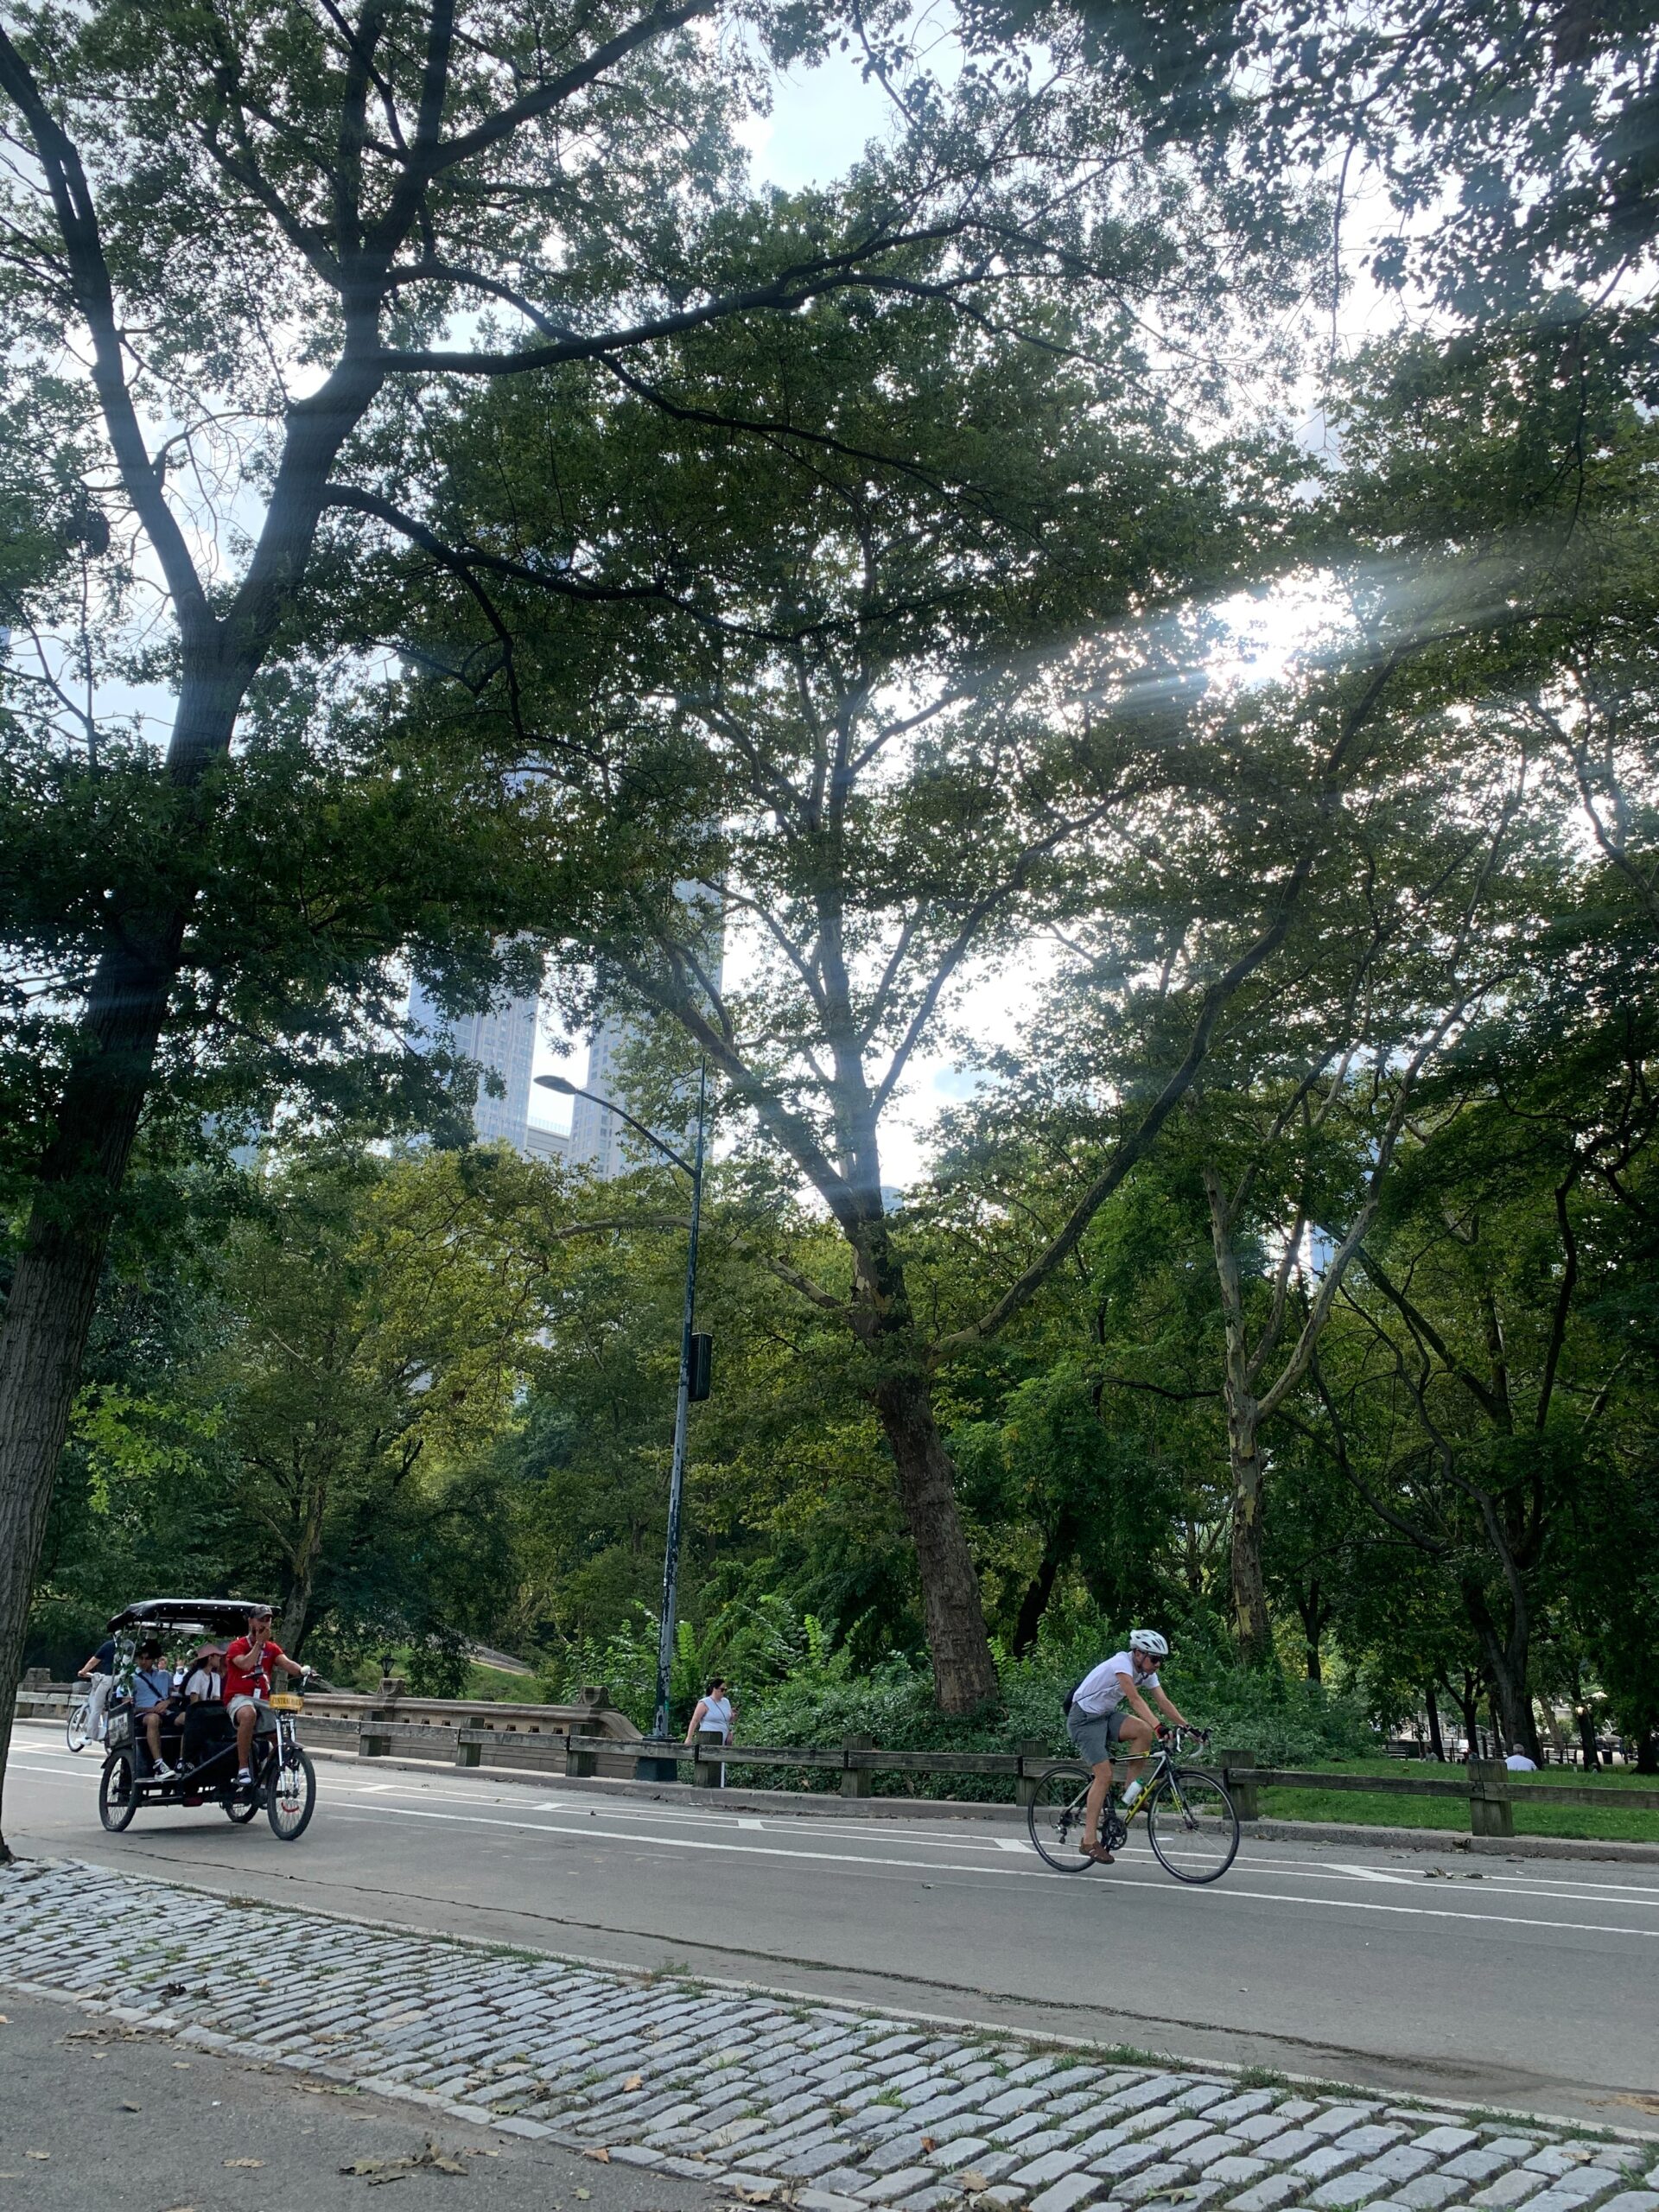 A person riding a bike and a group of people getting a bike cart tour in Central Park in New York City.